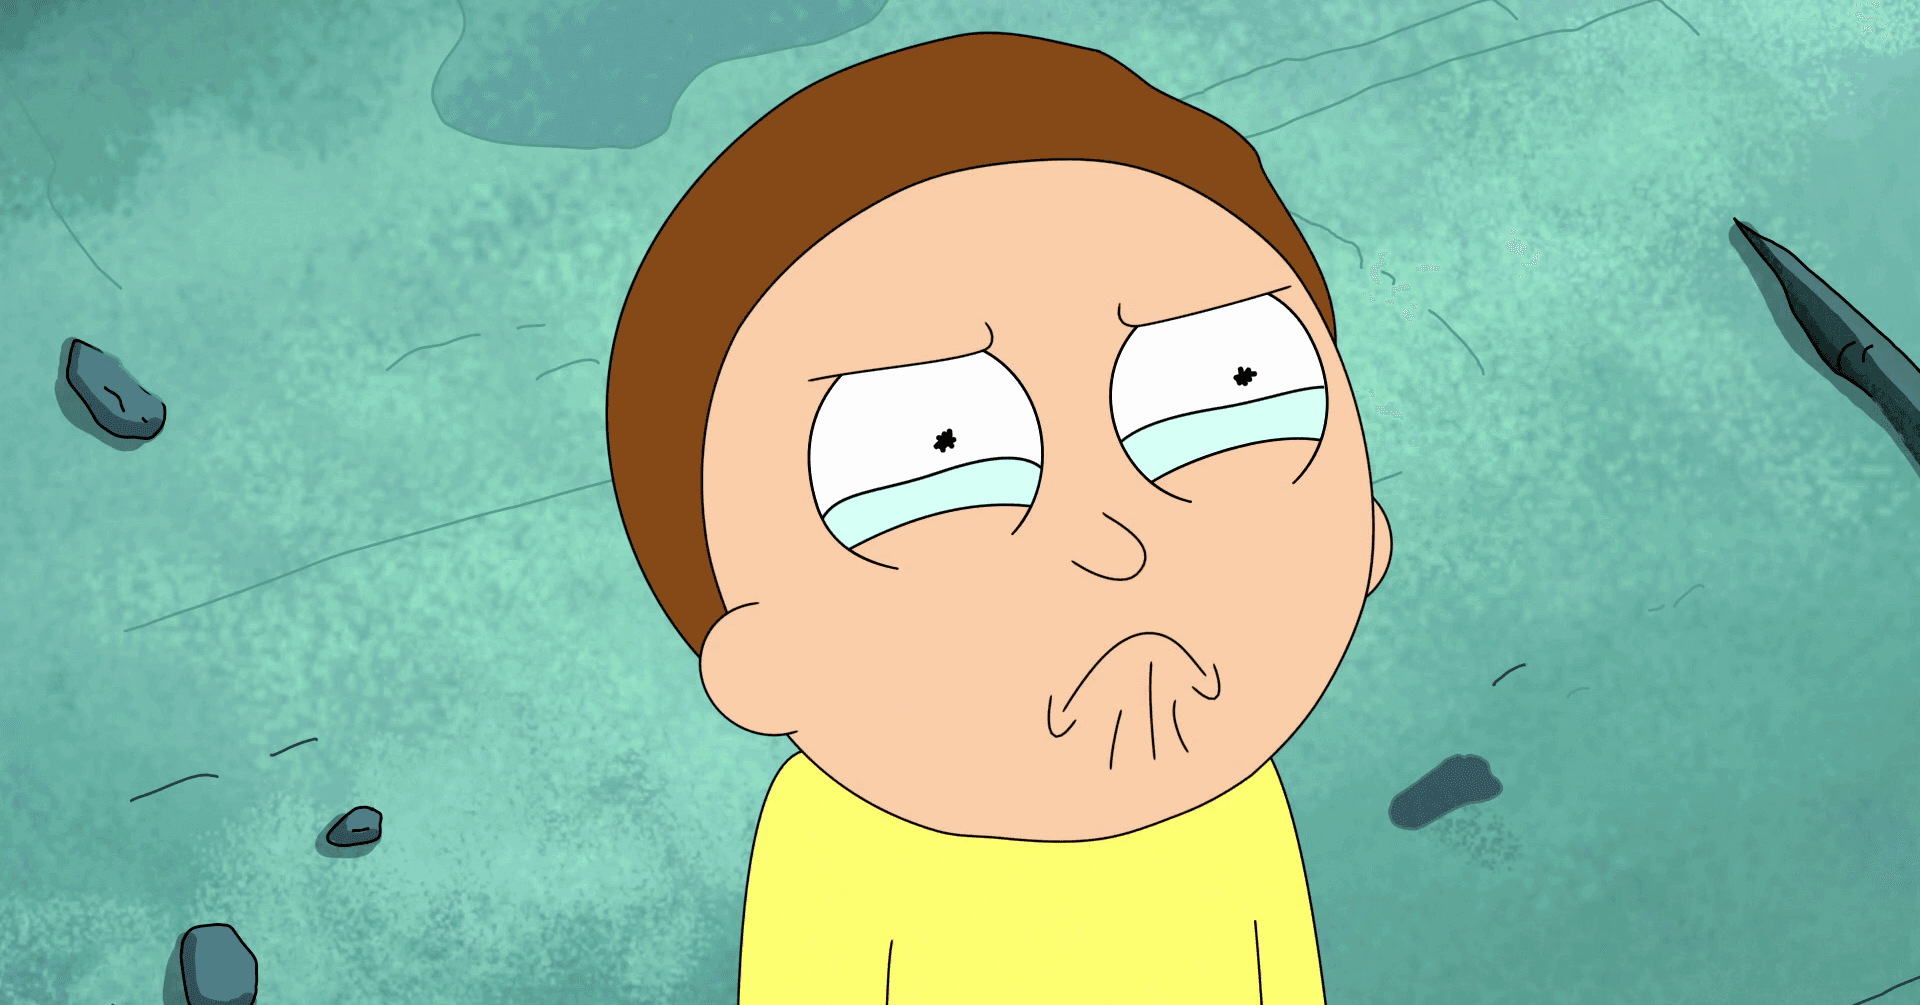 Rick And Morty Pawn Shop Wallpapers